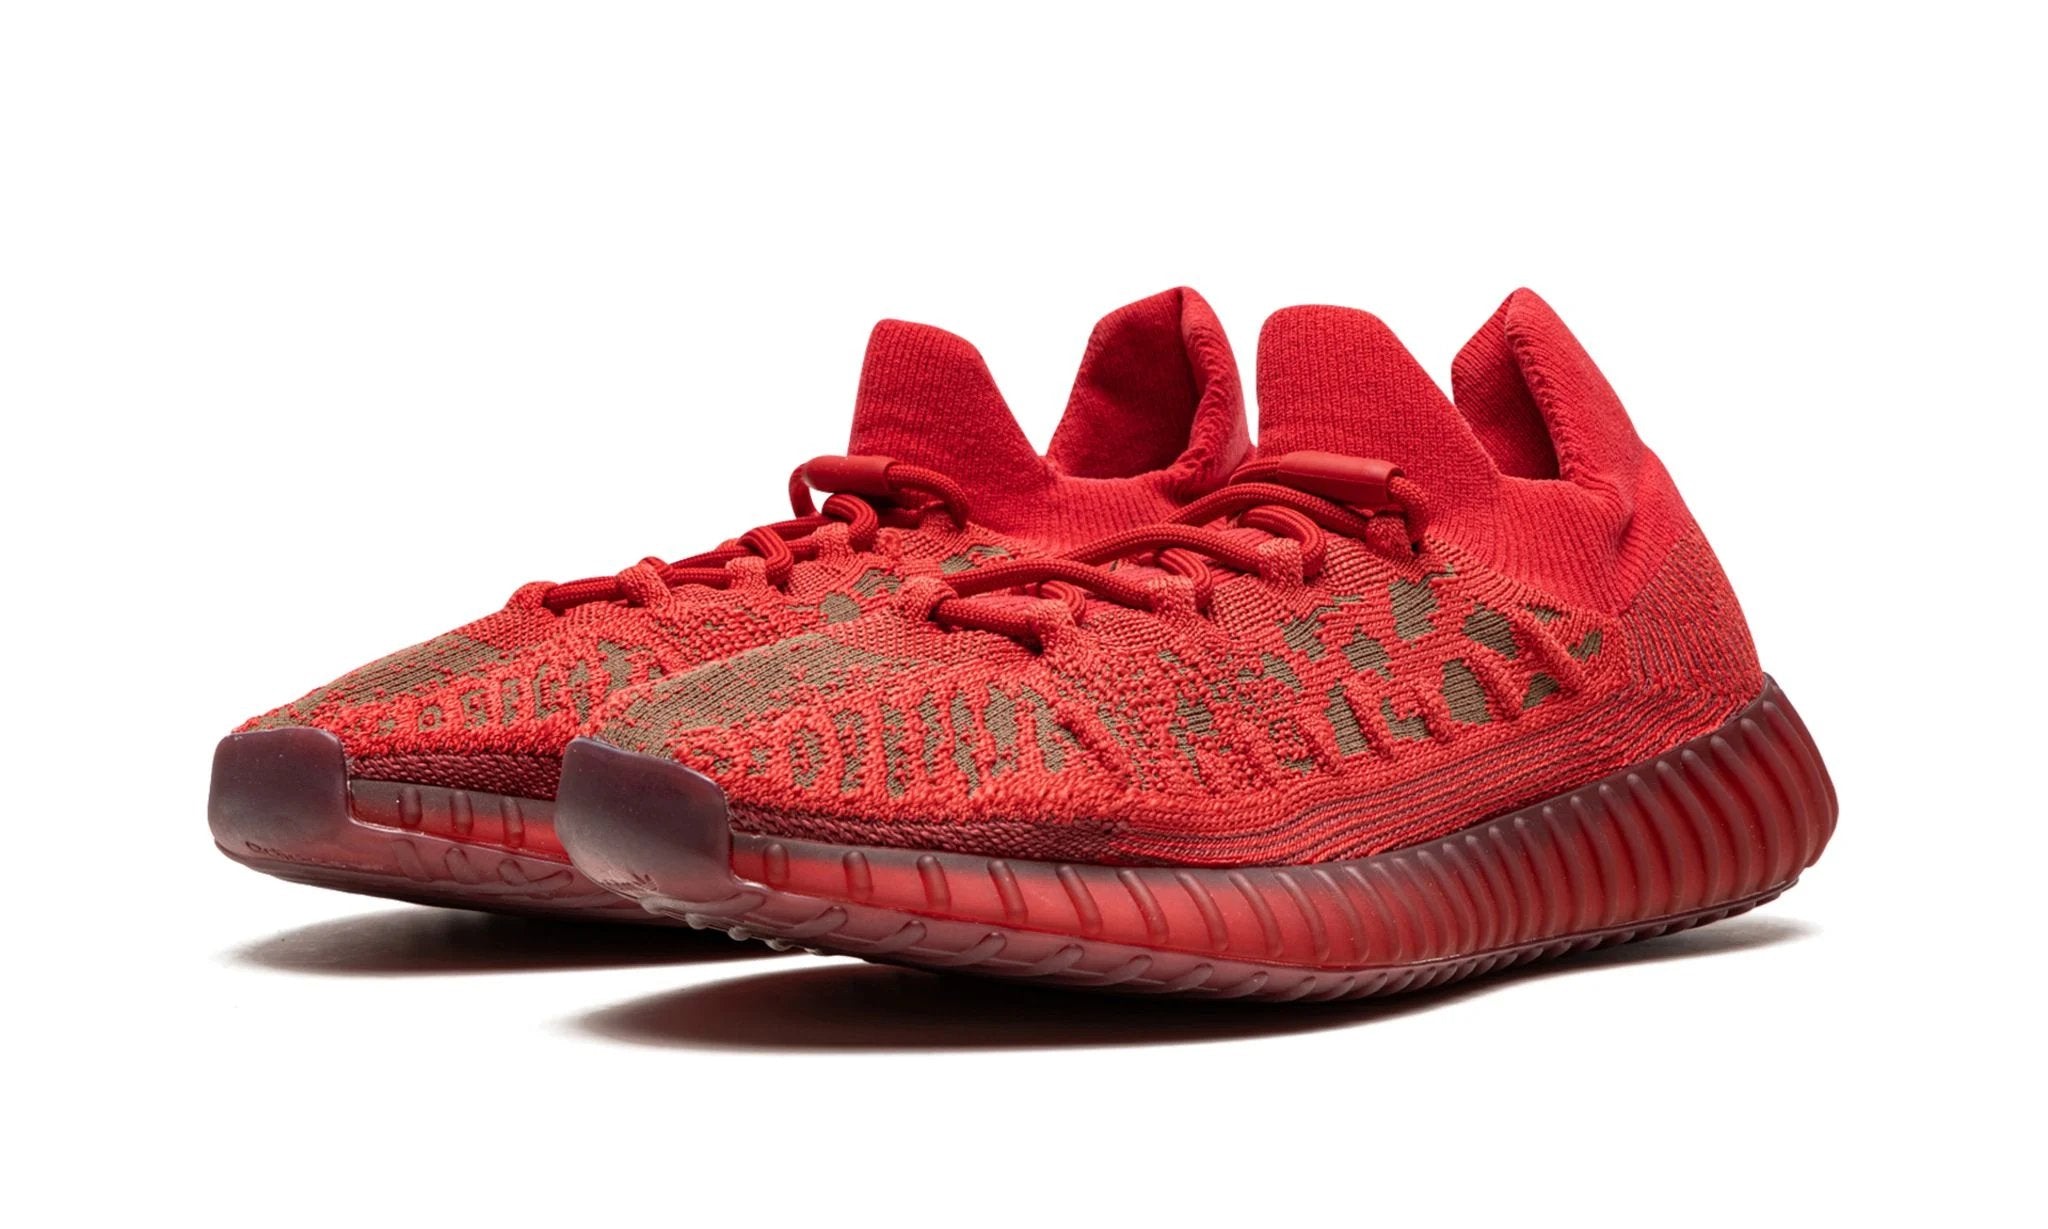 adidas Yeezy 350 V2 CMPCT Slate Red - GW6945 - Sneakers